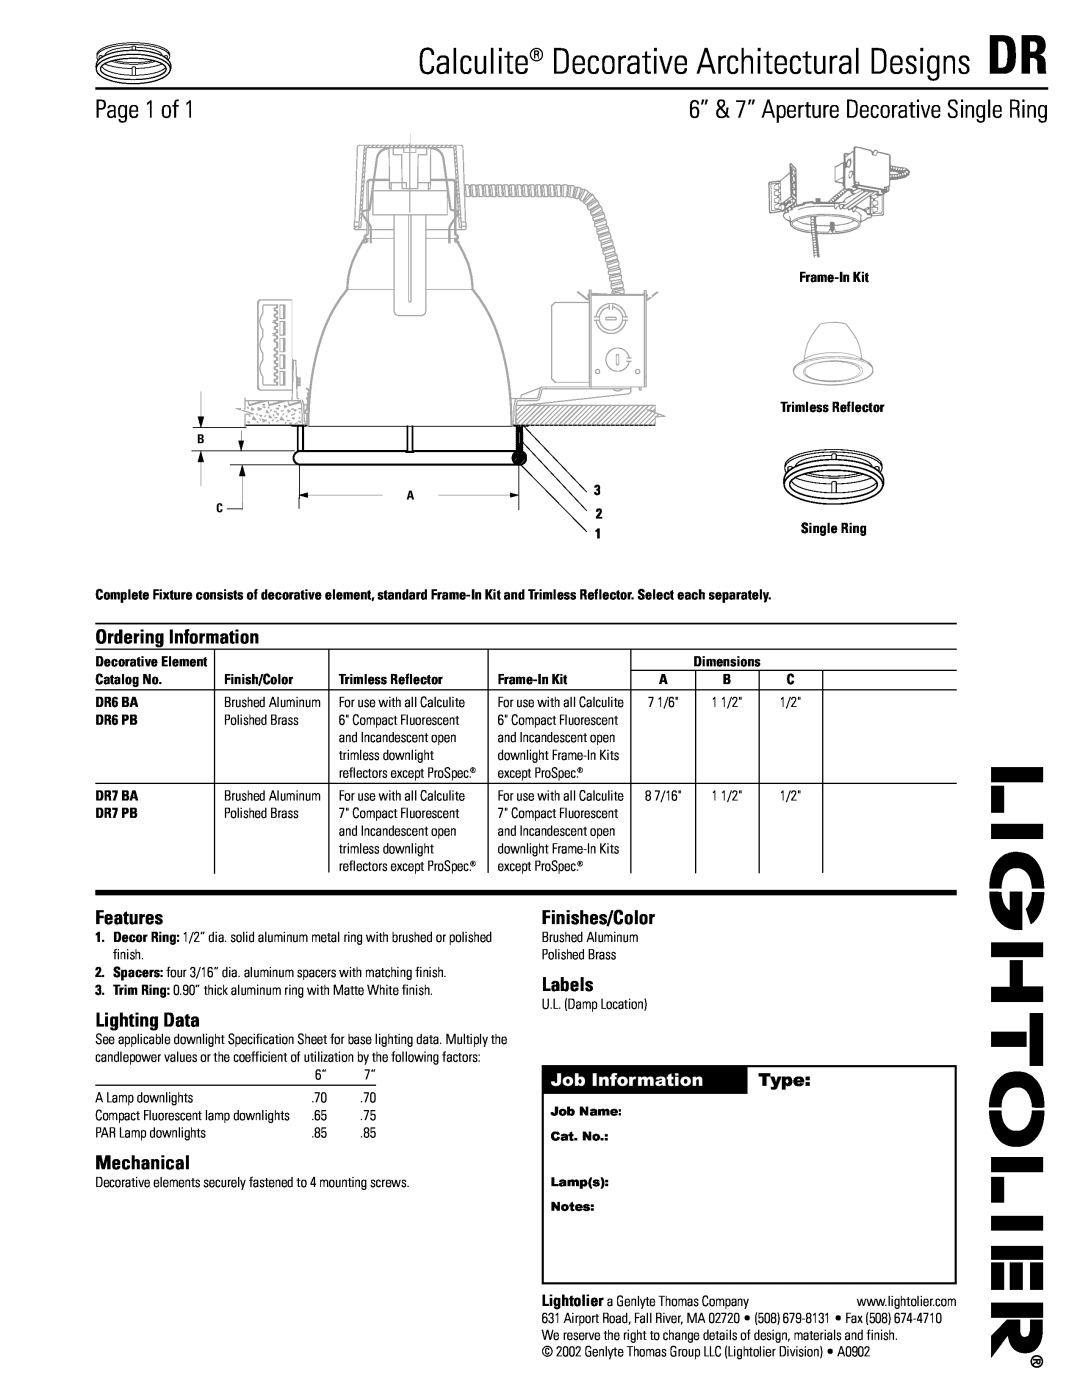 Lightolier specifications Calculite Decorative Architectural Designs DR, Page 1 of, Ordering Information, Features 